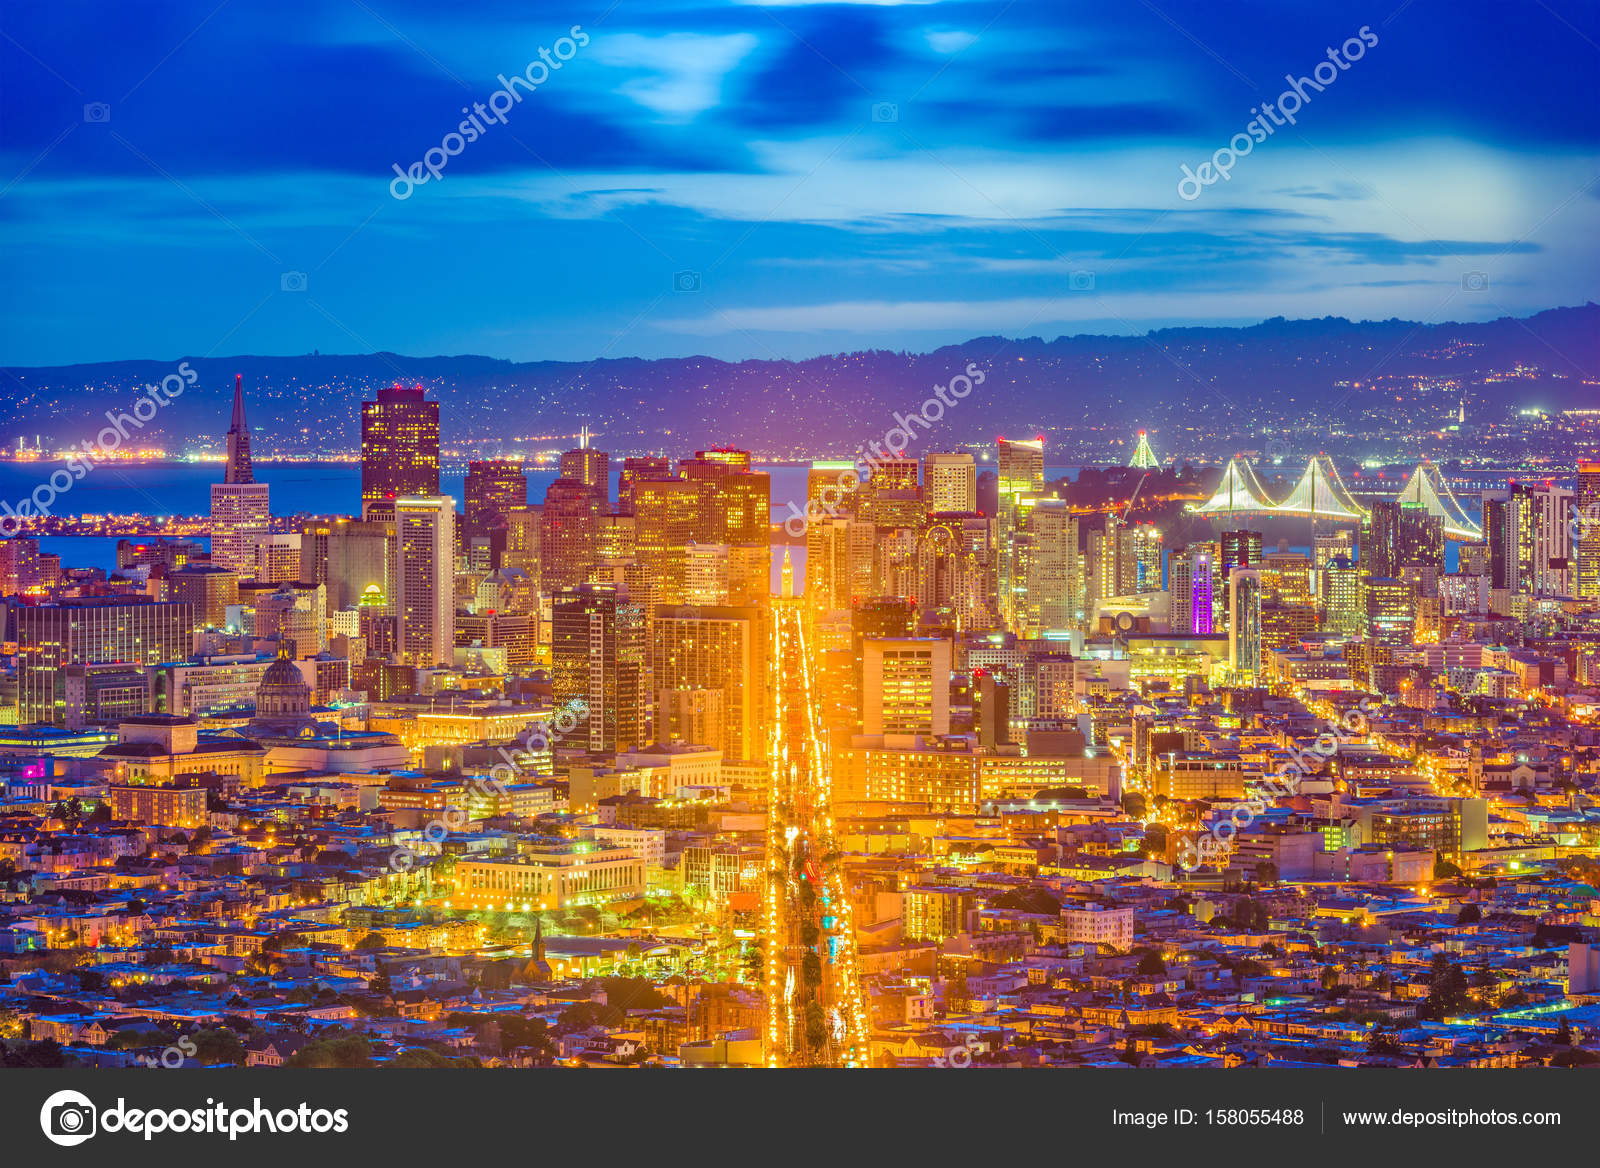 Sf Images Royalty Free Stock Sf Photos Pictures Depositphotos